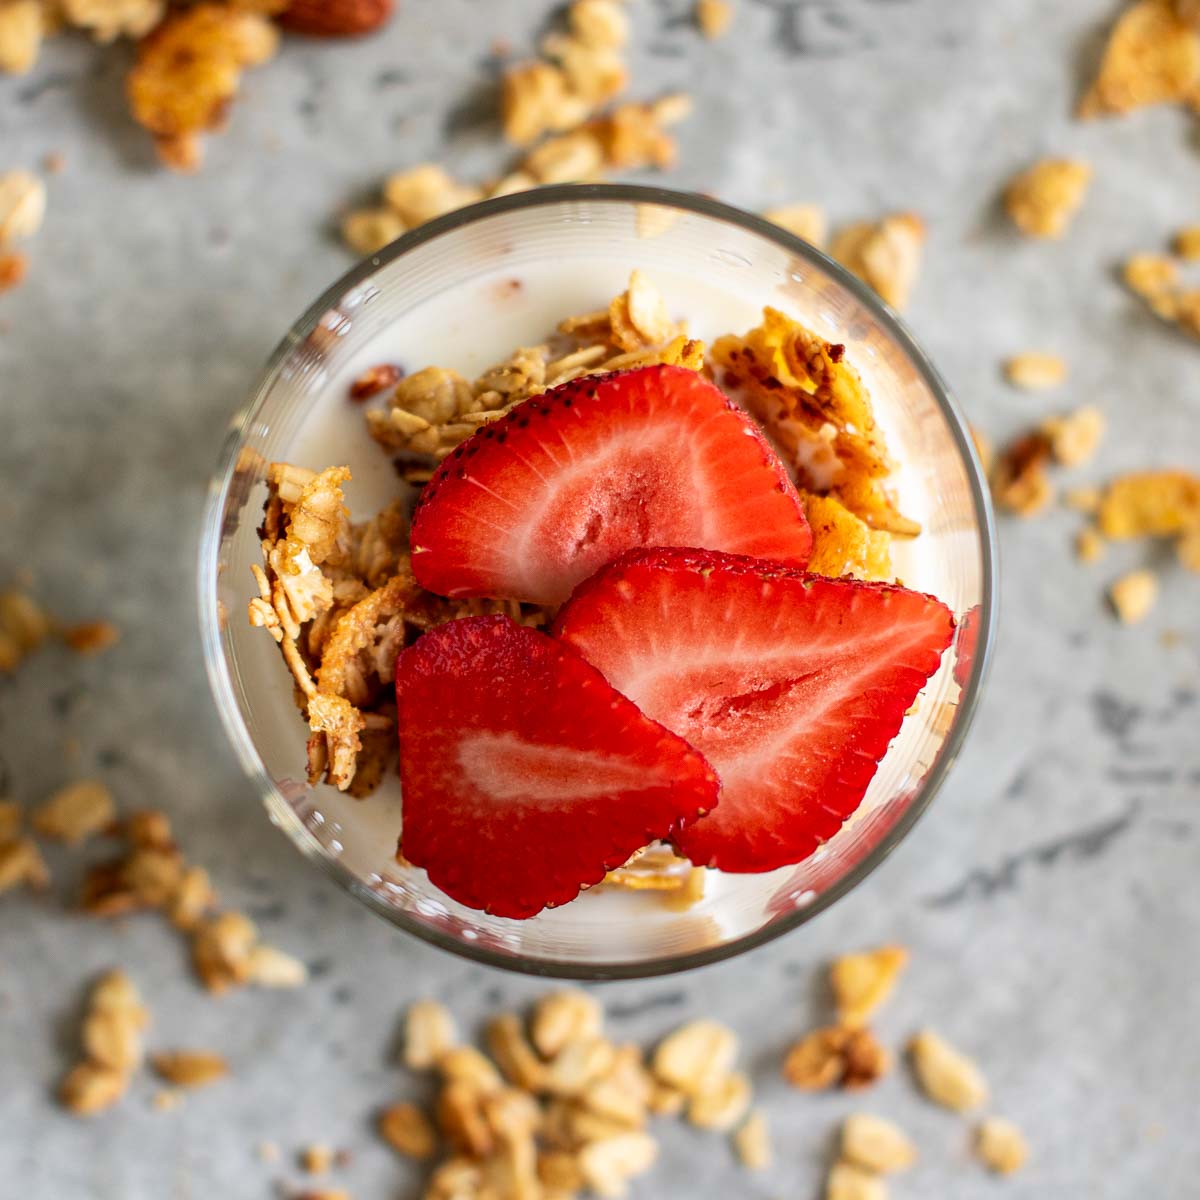 Sliced strawberries, granola and milk in a glass.